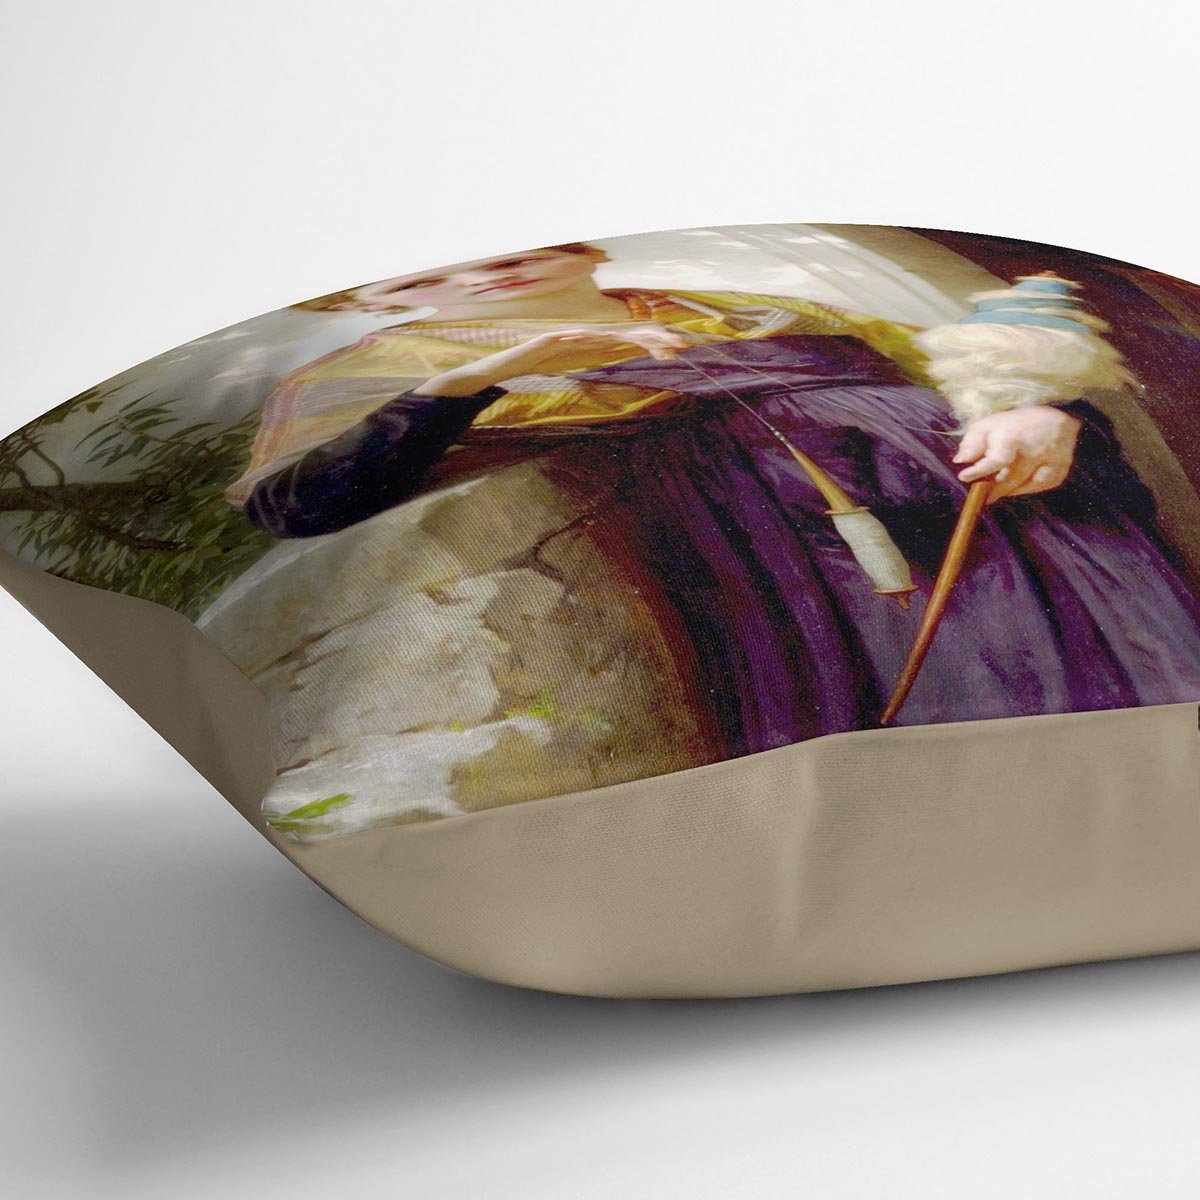 The Spinne By Bouguereau Cushion